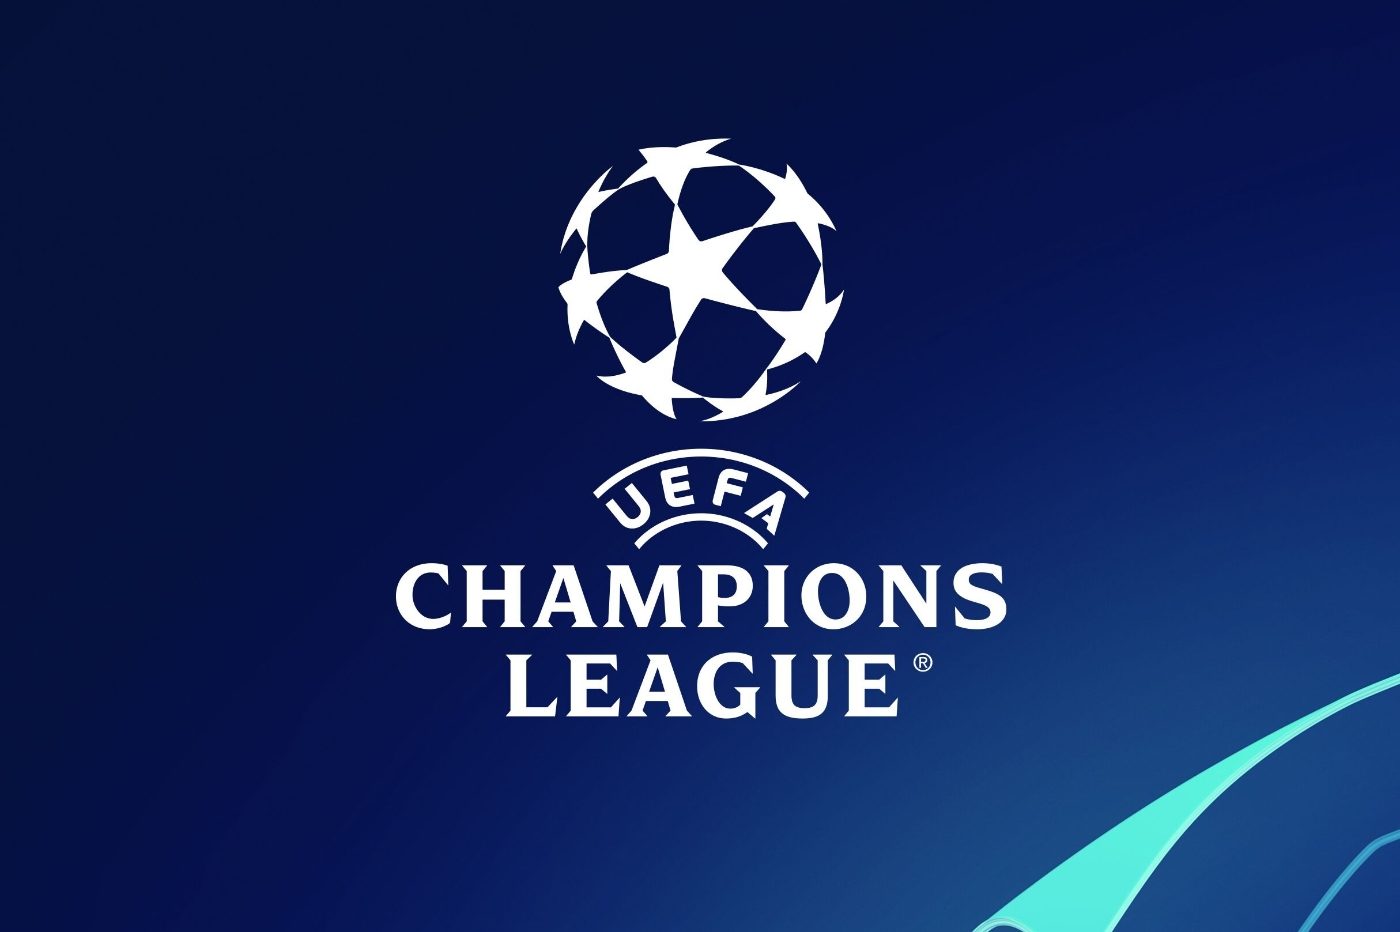 We already know who will win the 2023/2024 Champions League… thanks to